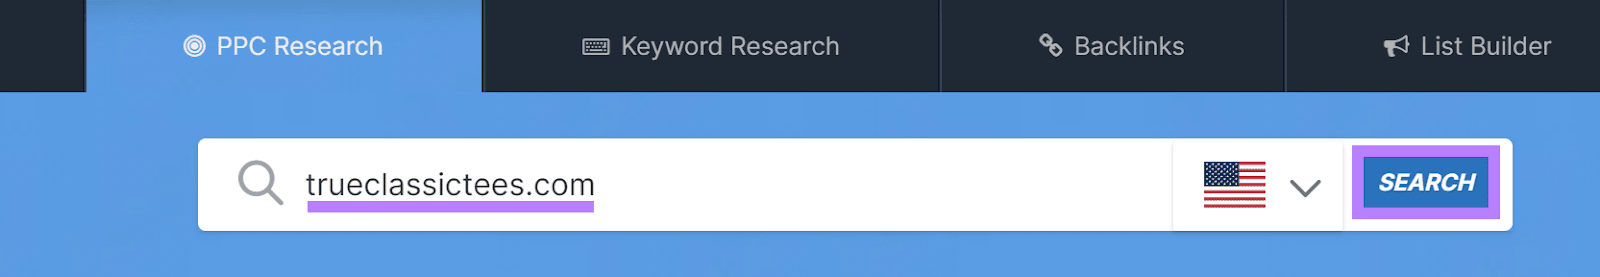 SpyFu PPC Research tool selected, domain entered, and Search button highlighted.